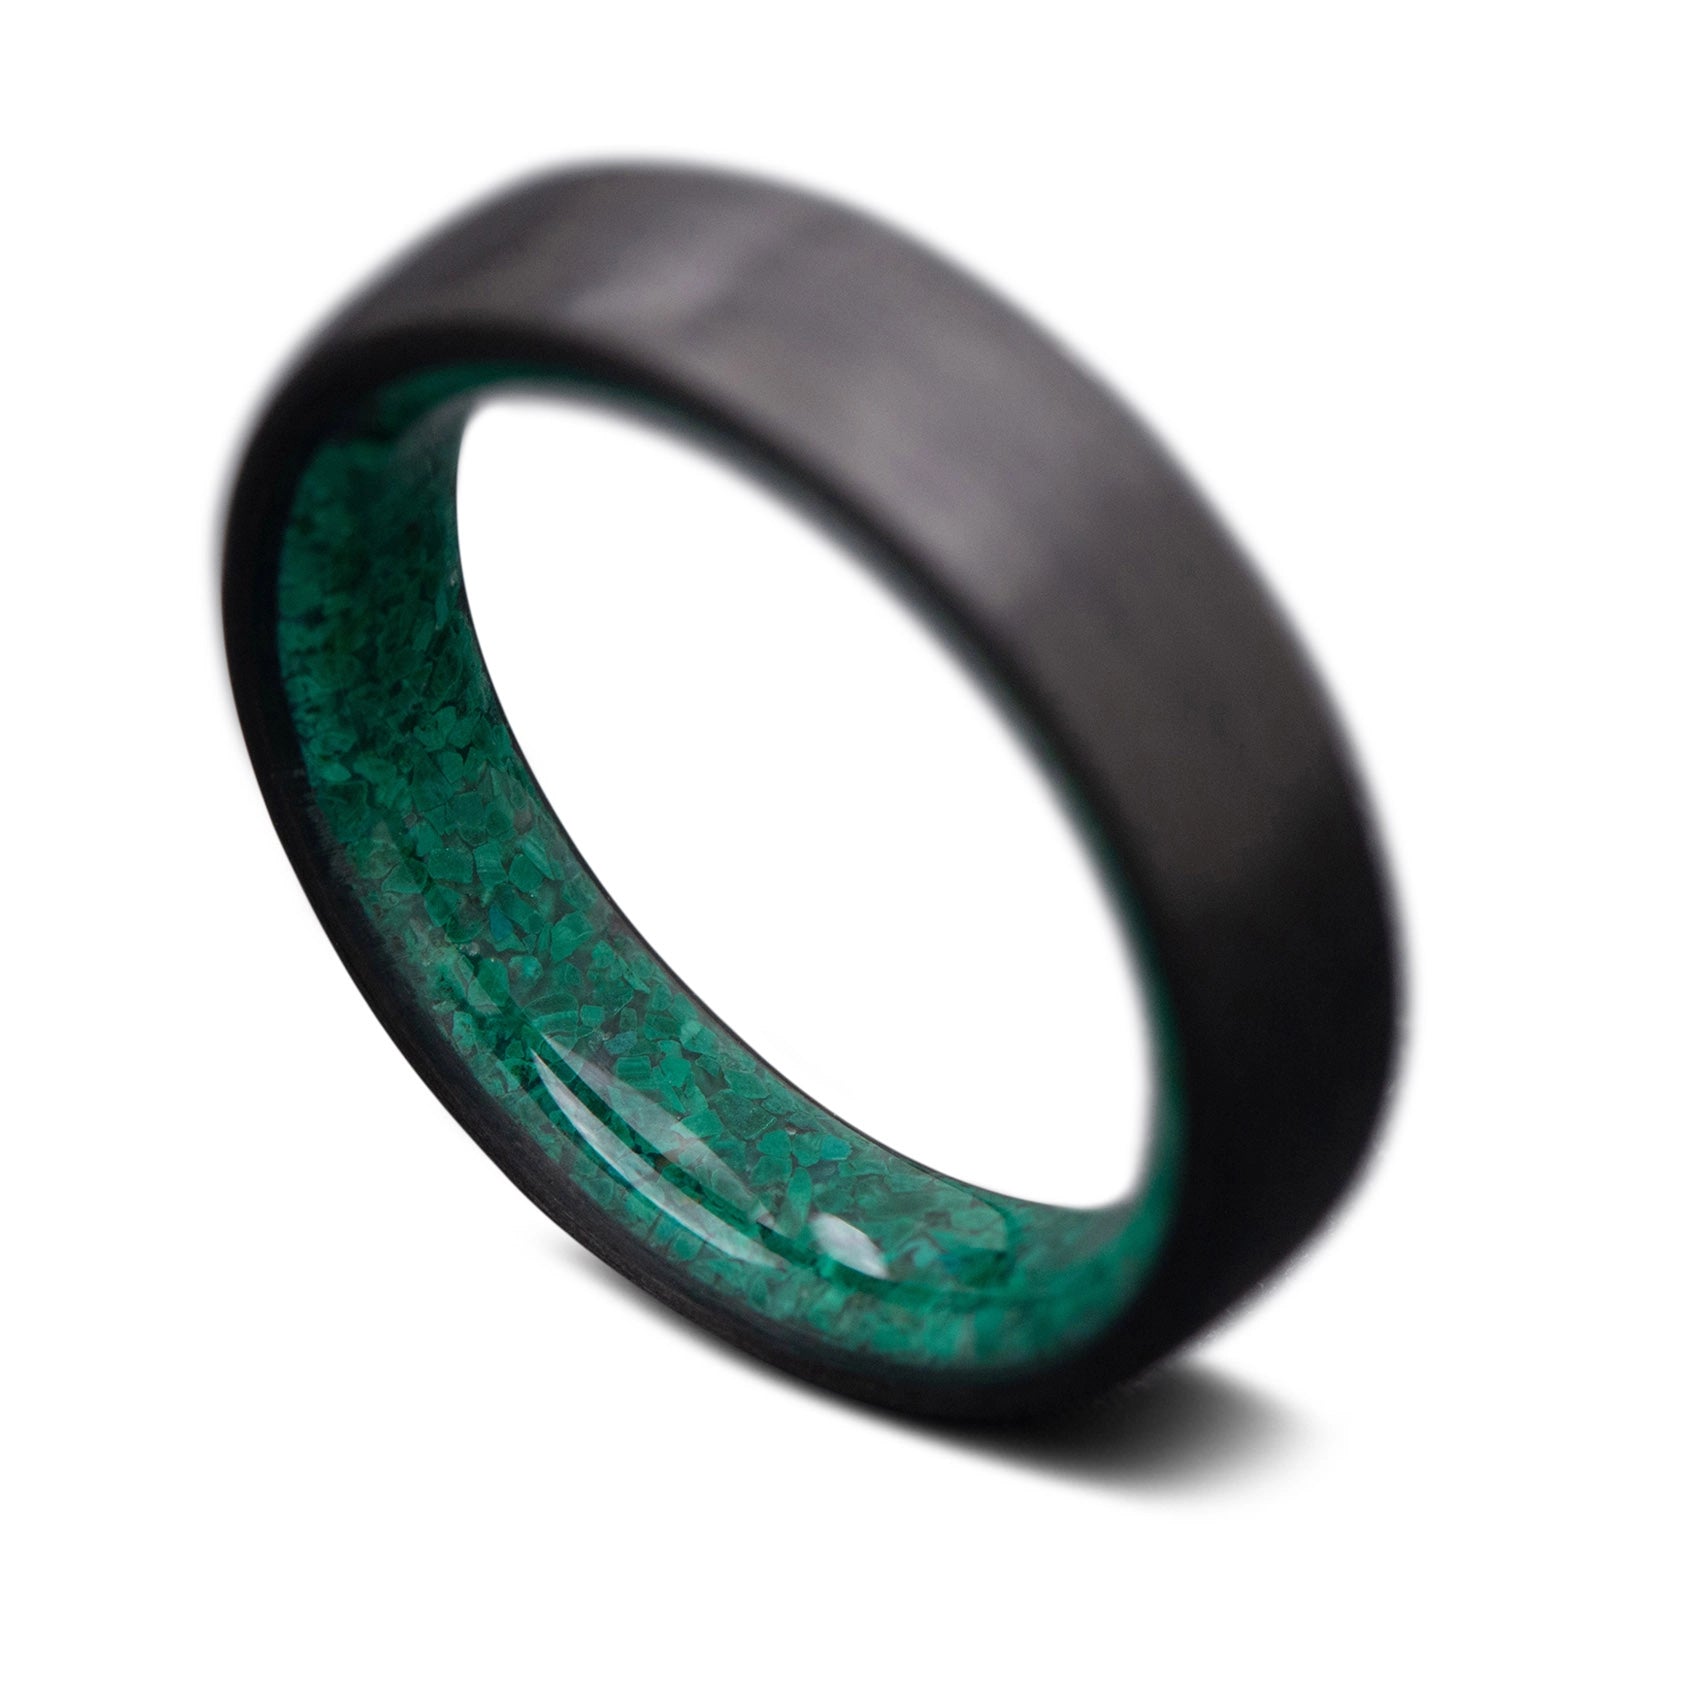 Back of Carbon Fiber ring with Malachite inner sleeve, 5mm -THE QUANTUM